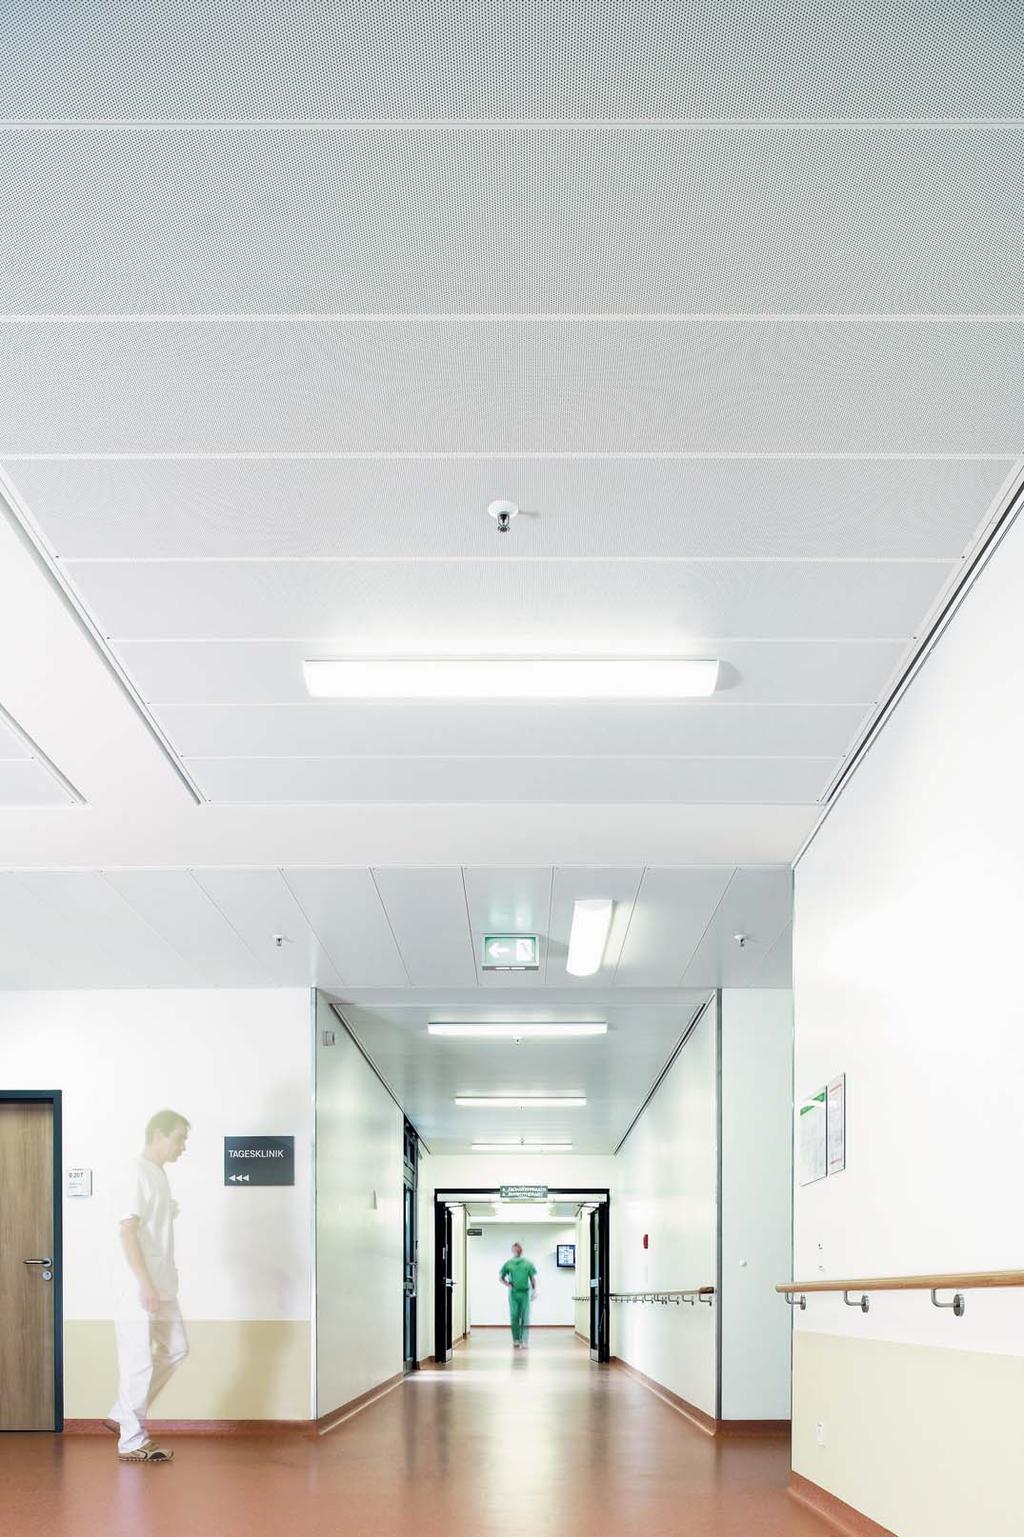 8 Metal ceilings EFFECTIVE DISINFECTION USING THE